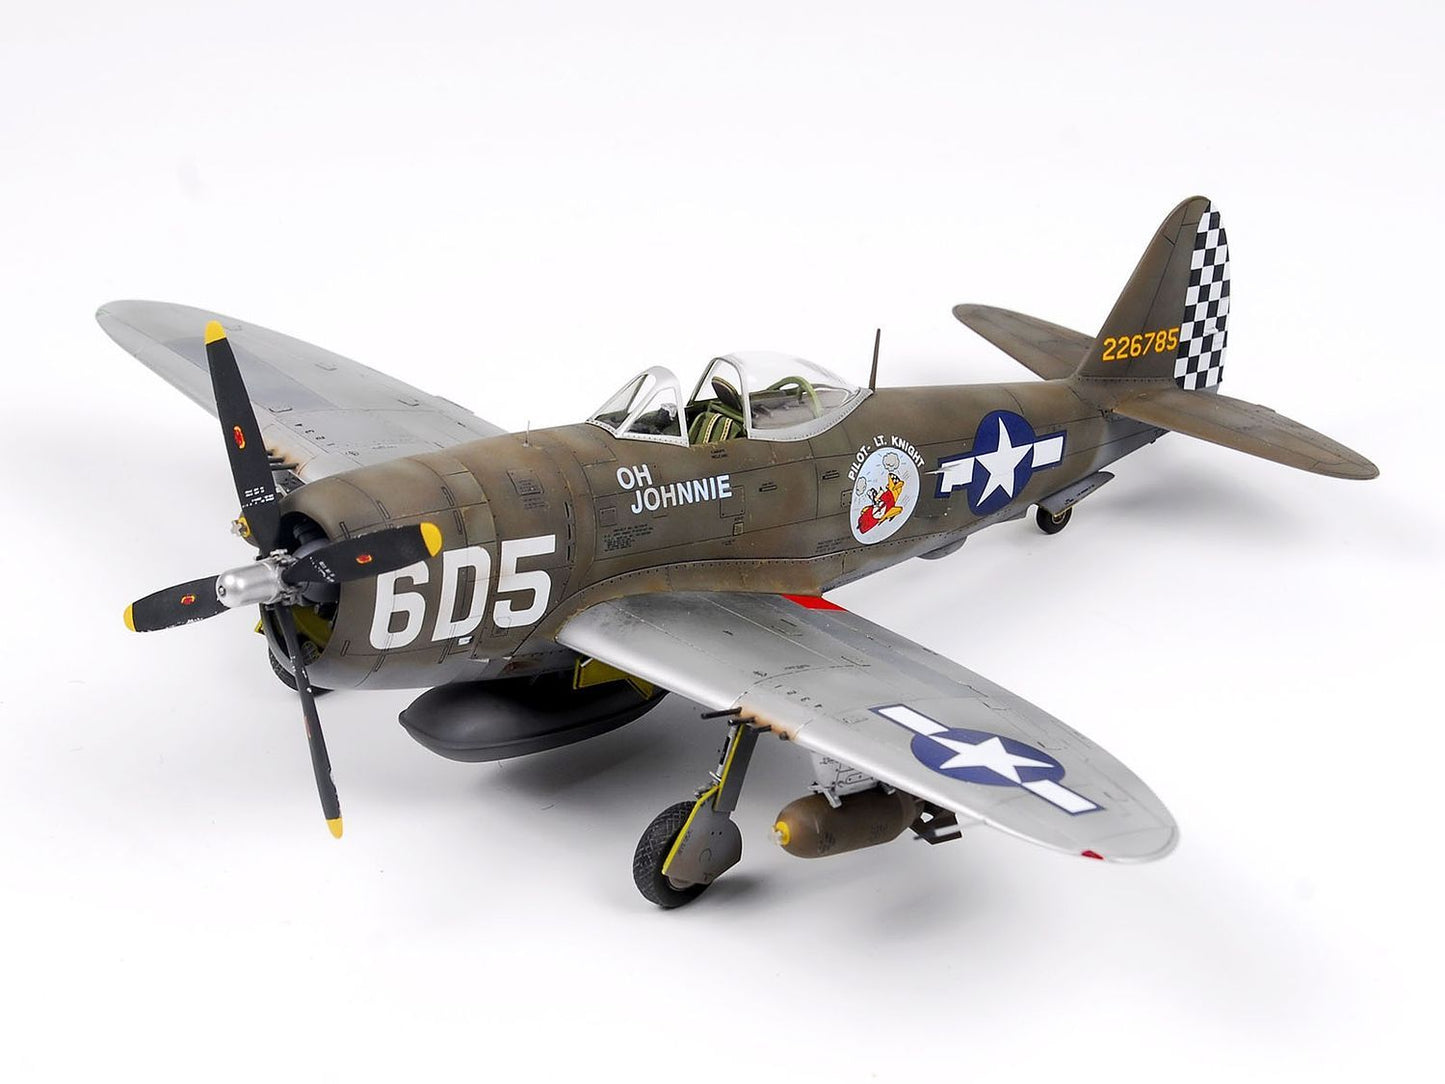 Wolf Pack 1:48 US Army Air Force P-47D Thunderbolt